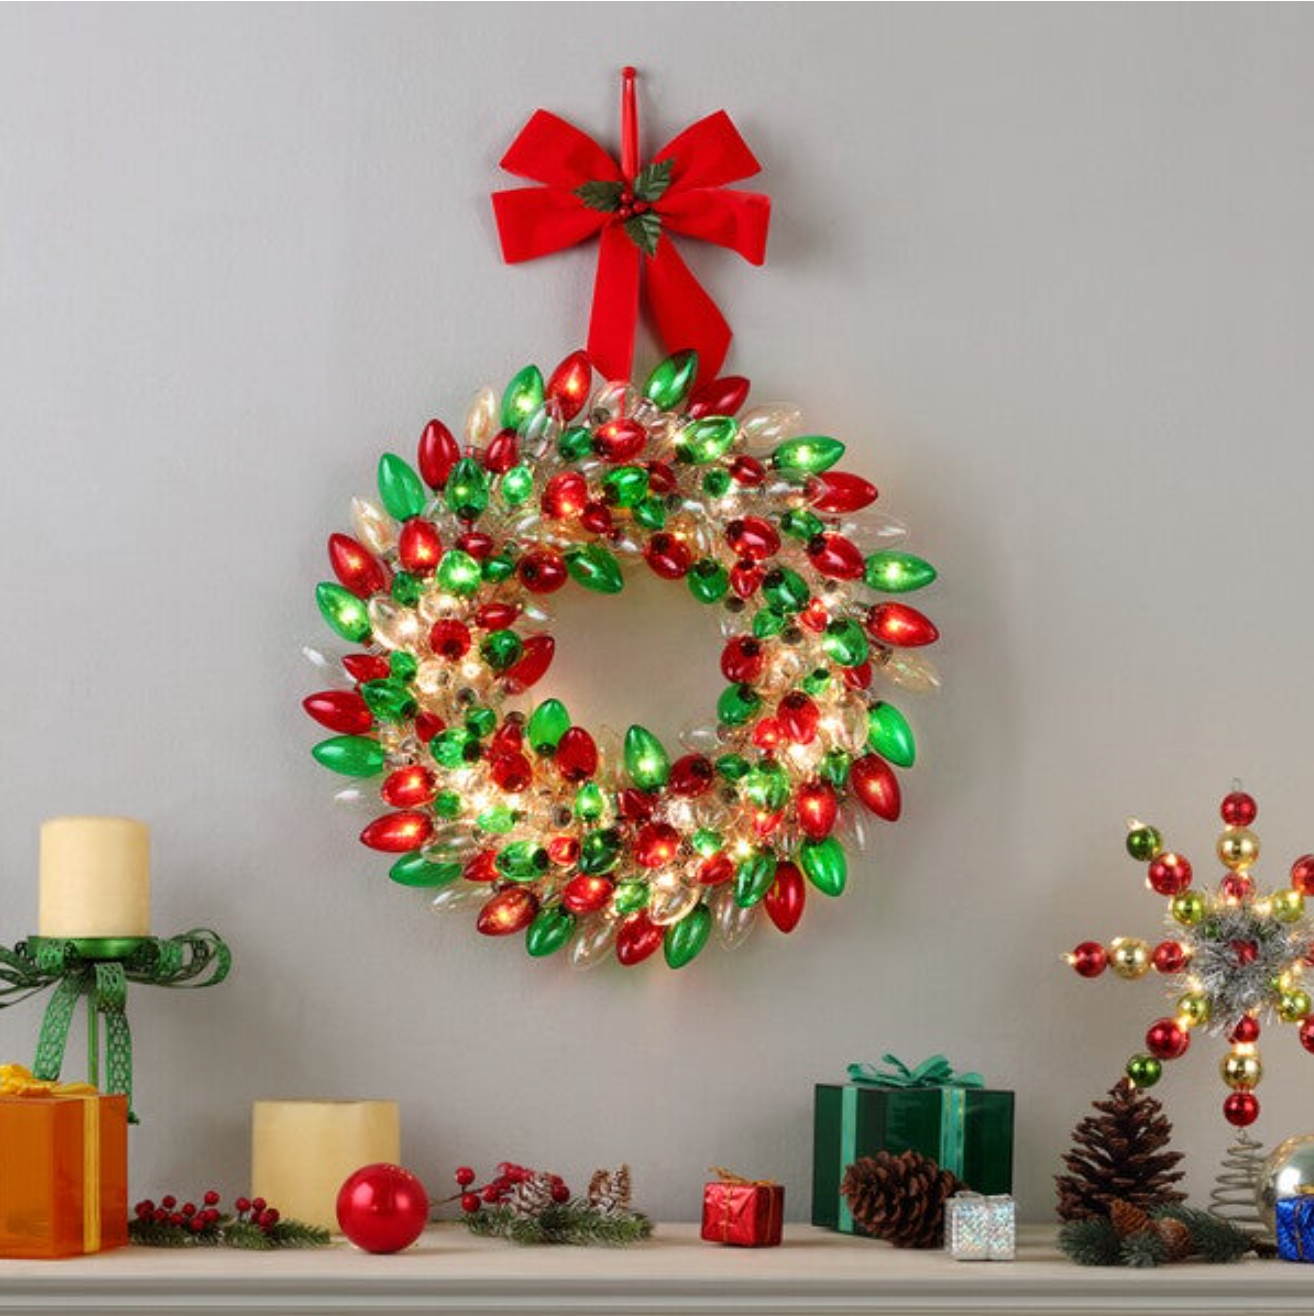 Mr. Christmas LED Multicolored Bulb Wreath Indoor Christmas Decor – 18 in.